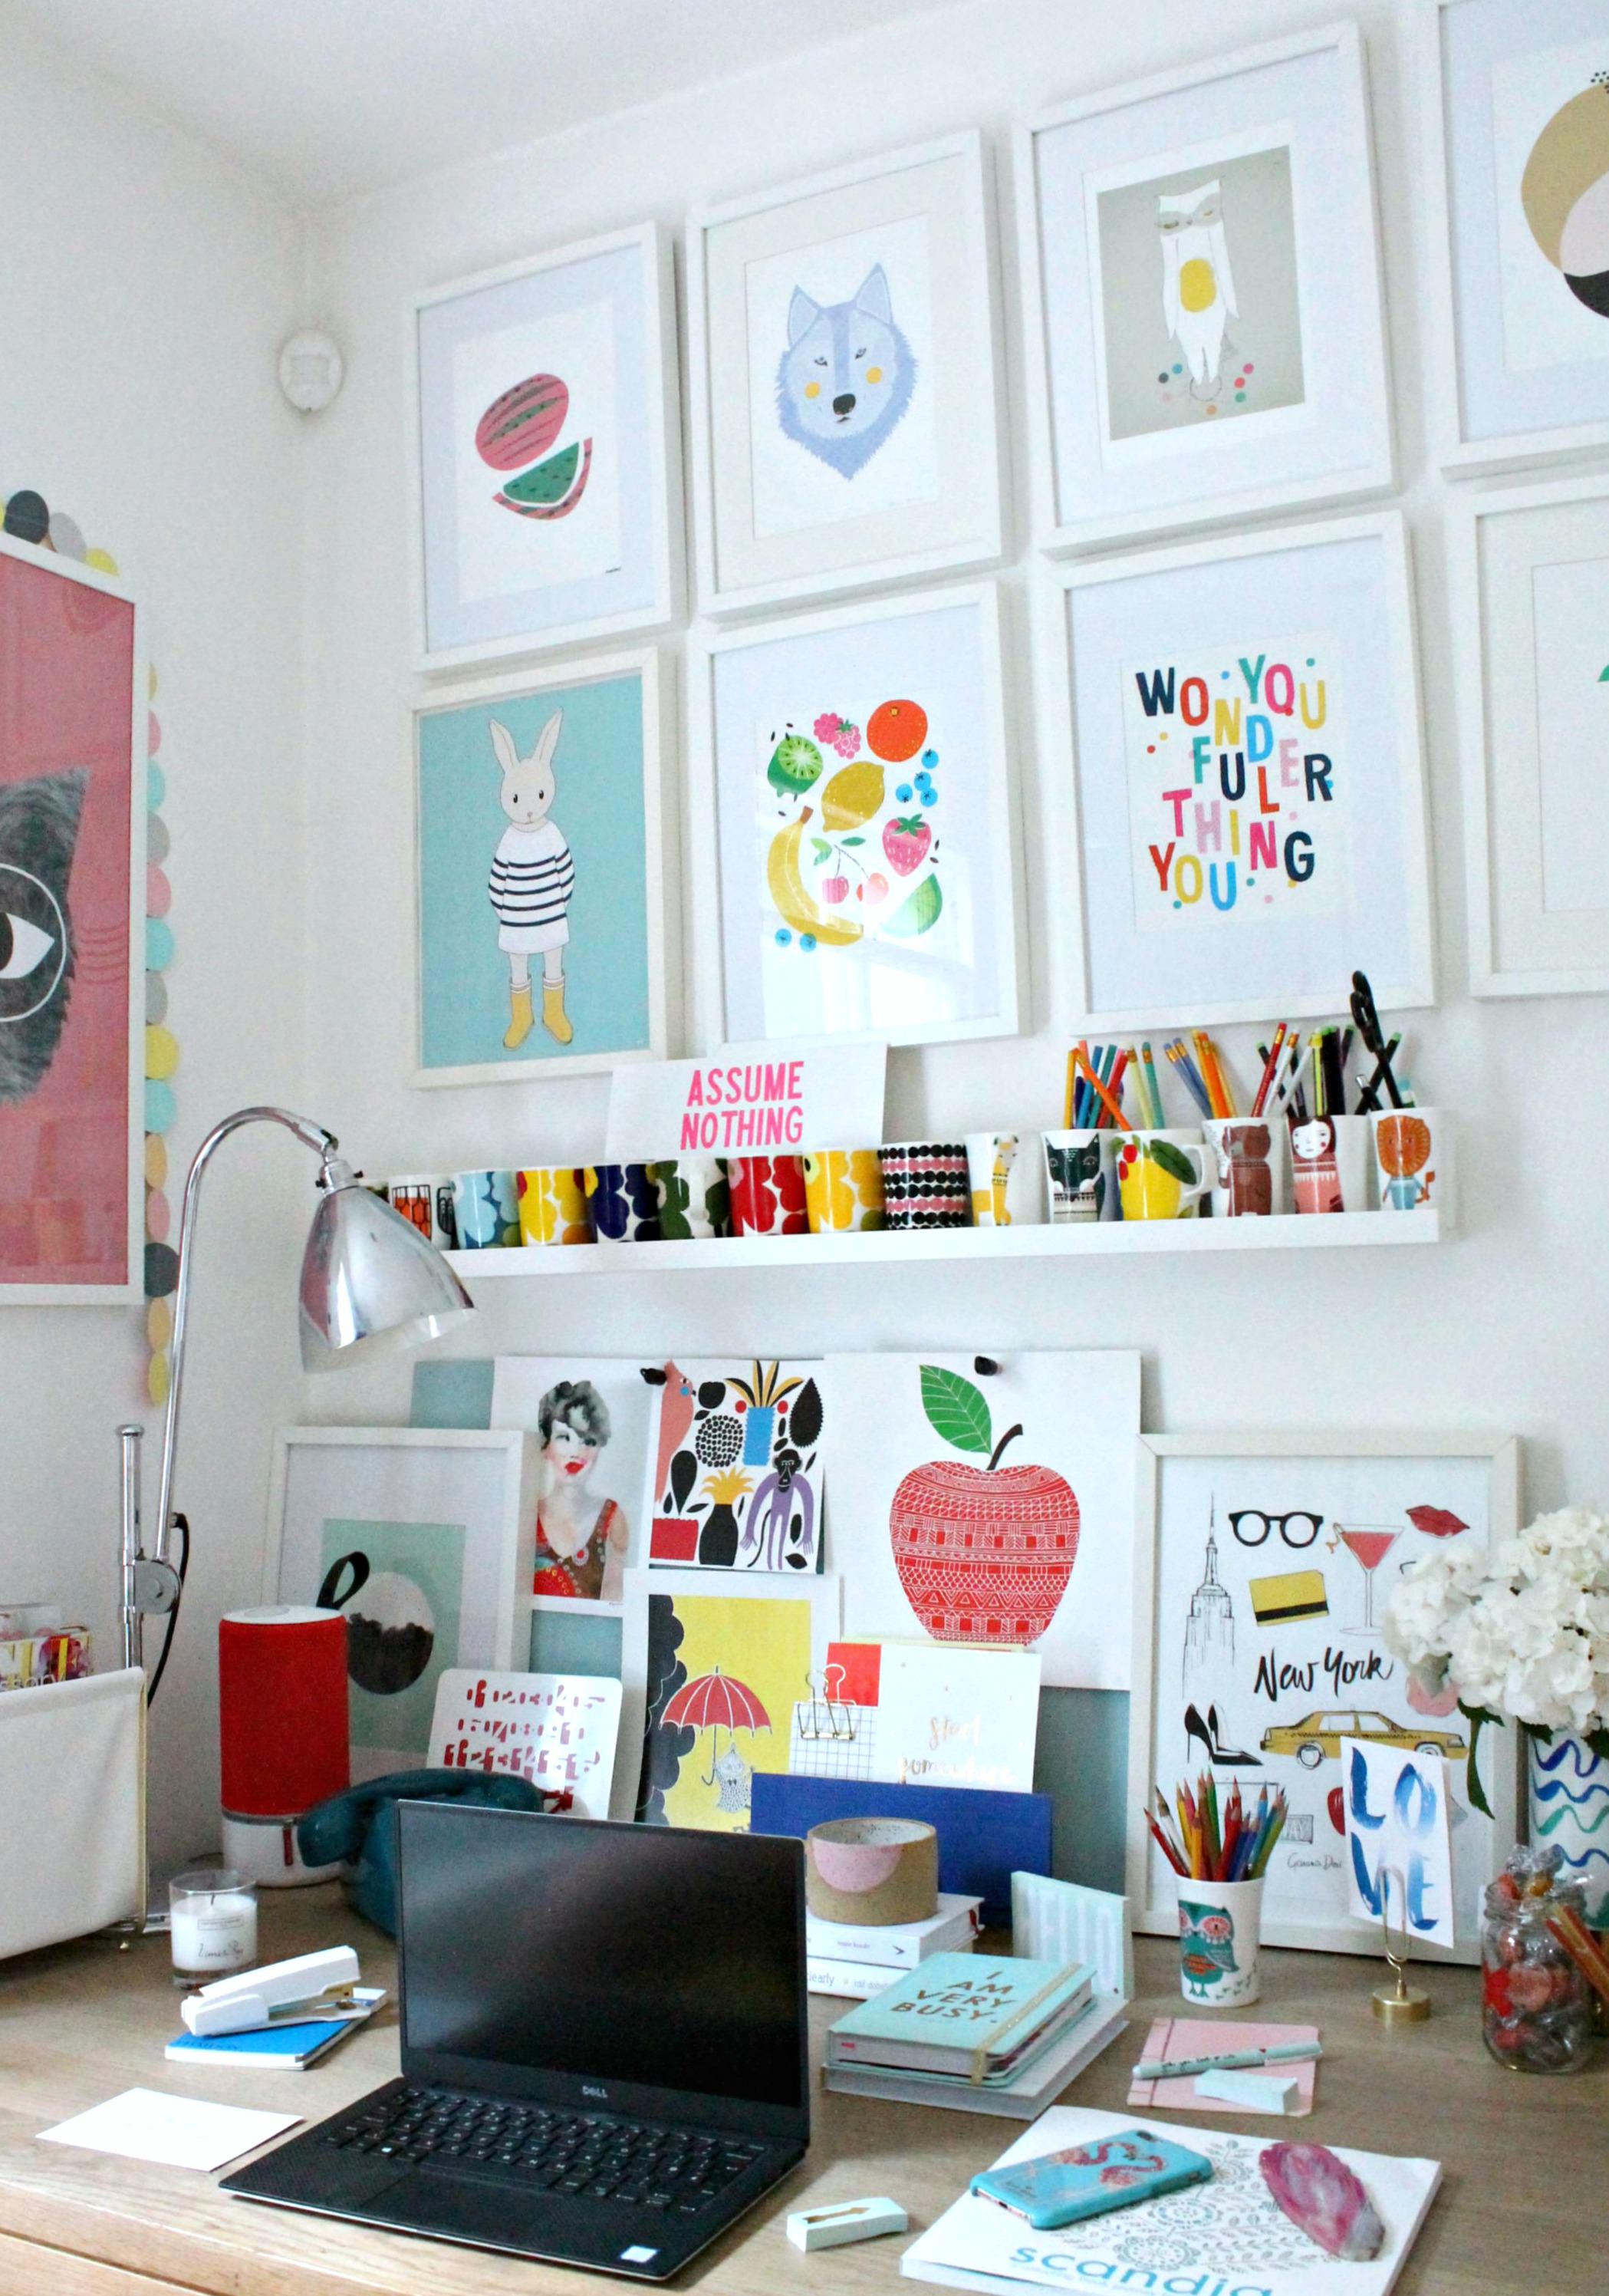 Little-Big-Bell's-workspace-2-photo-by-Little-Big-Bell